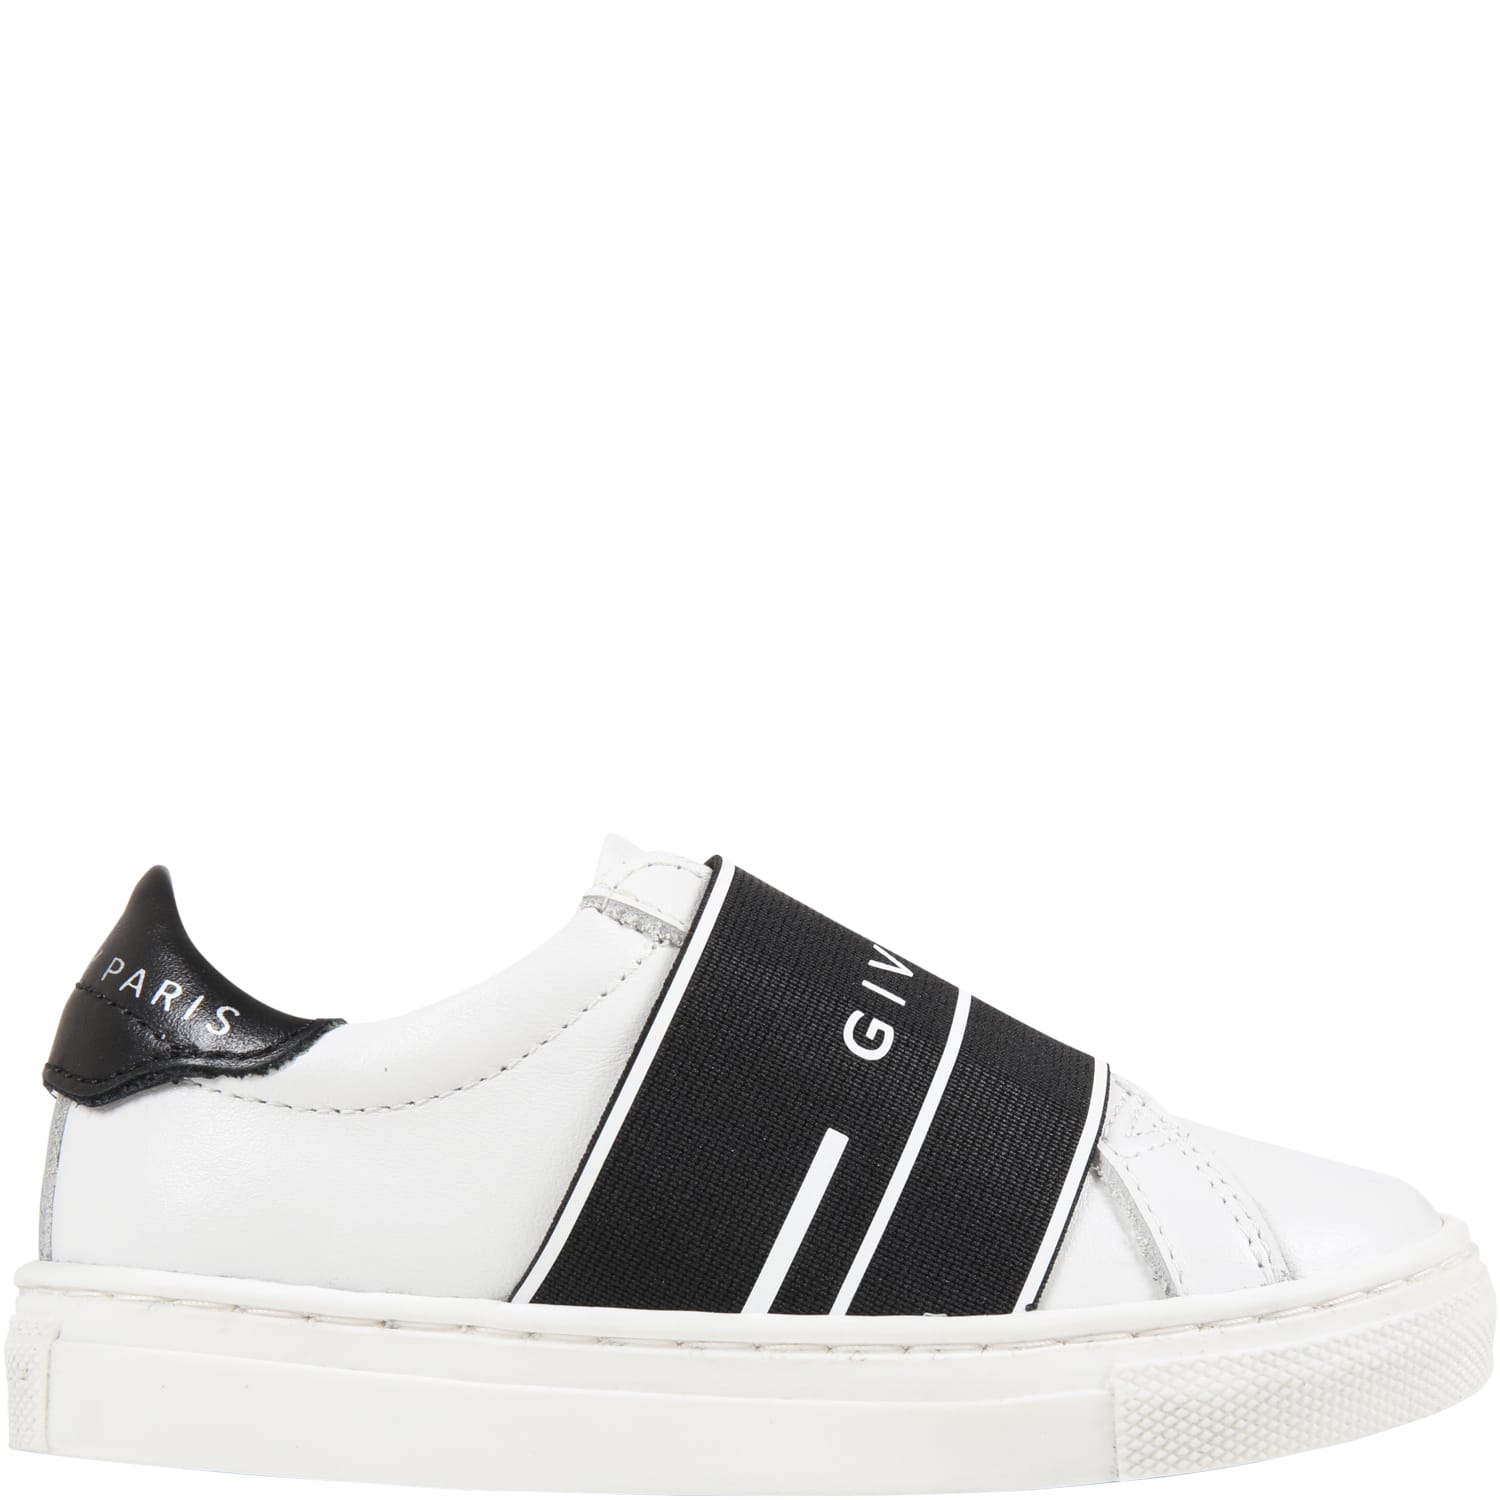 TK 360 Knit Sneakers in Black - Givenchy | Mytheresa